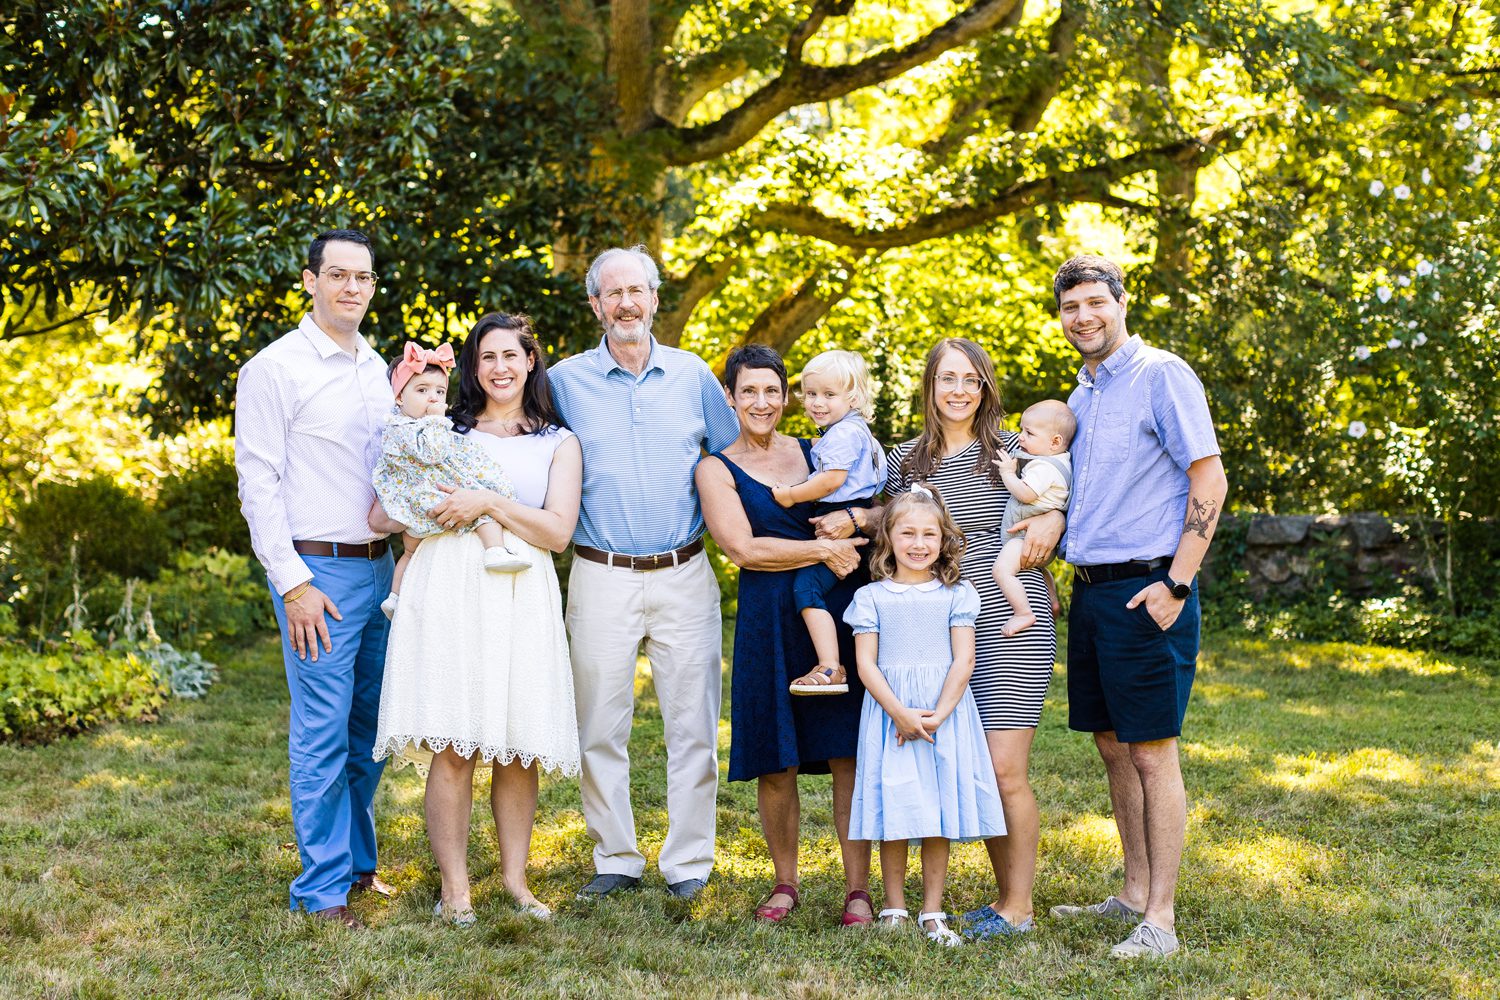 Extended family photo with grandparents, daughters with their husbands, and four grandchildren outside with green trees in background